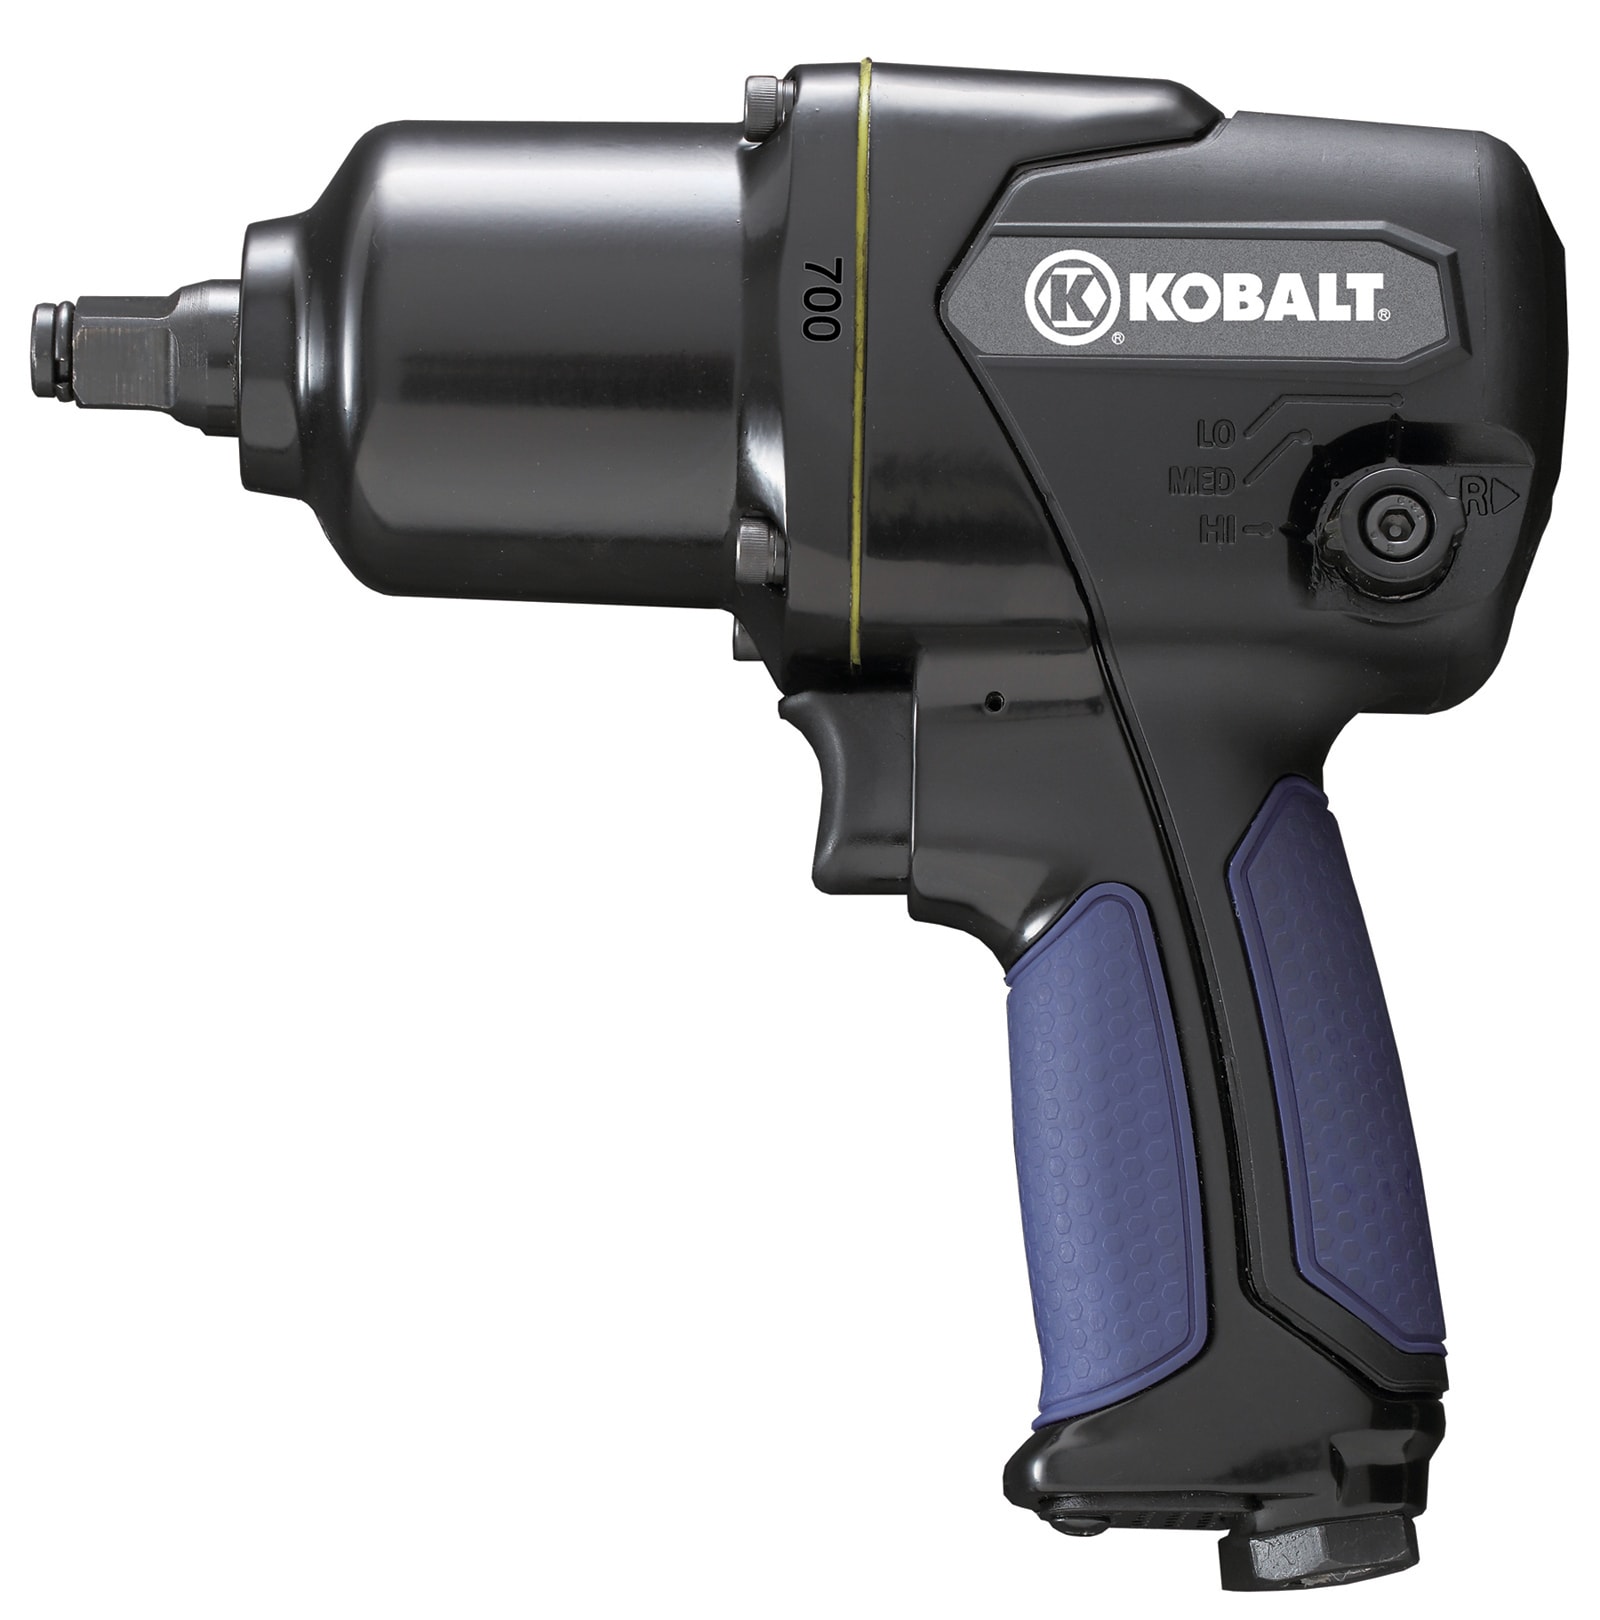 Kobalt 0.5-in 700-ft lb Air Impact Wrench at Lowes.com